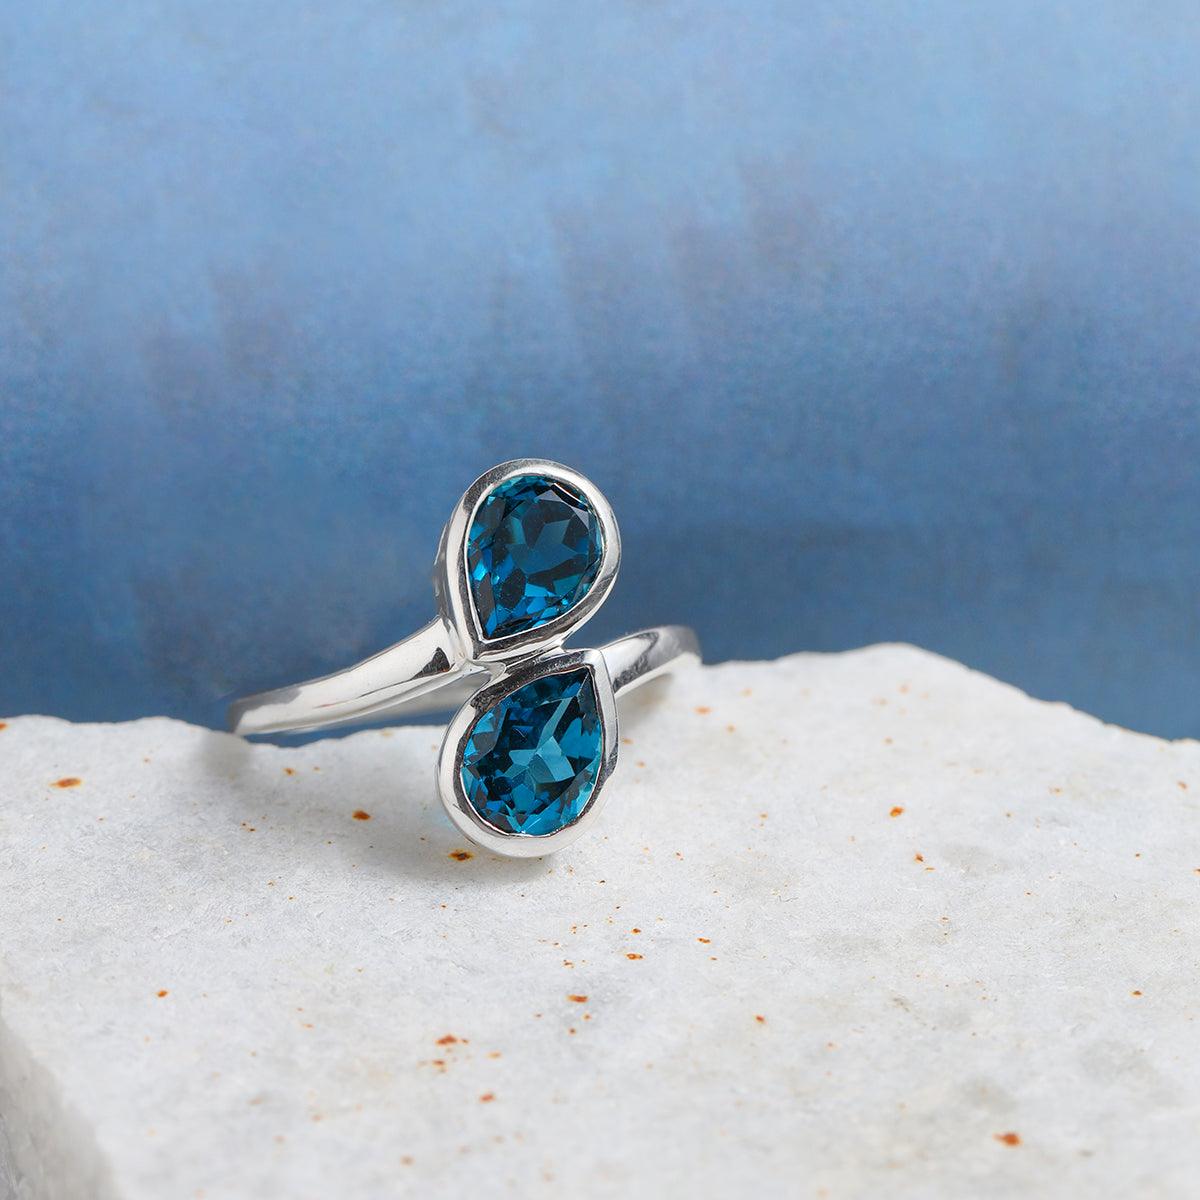 2.47 Ct. London Blue Topaz Ring Solid 925 Sterling Silver Jewelry - YoTreasure